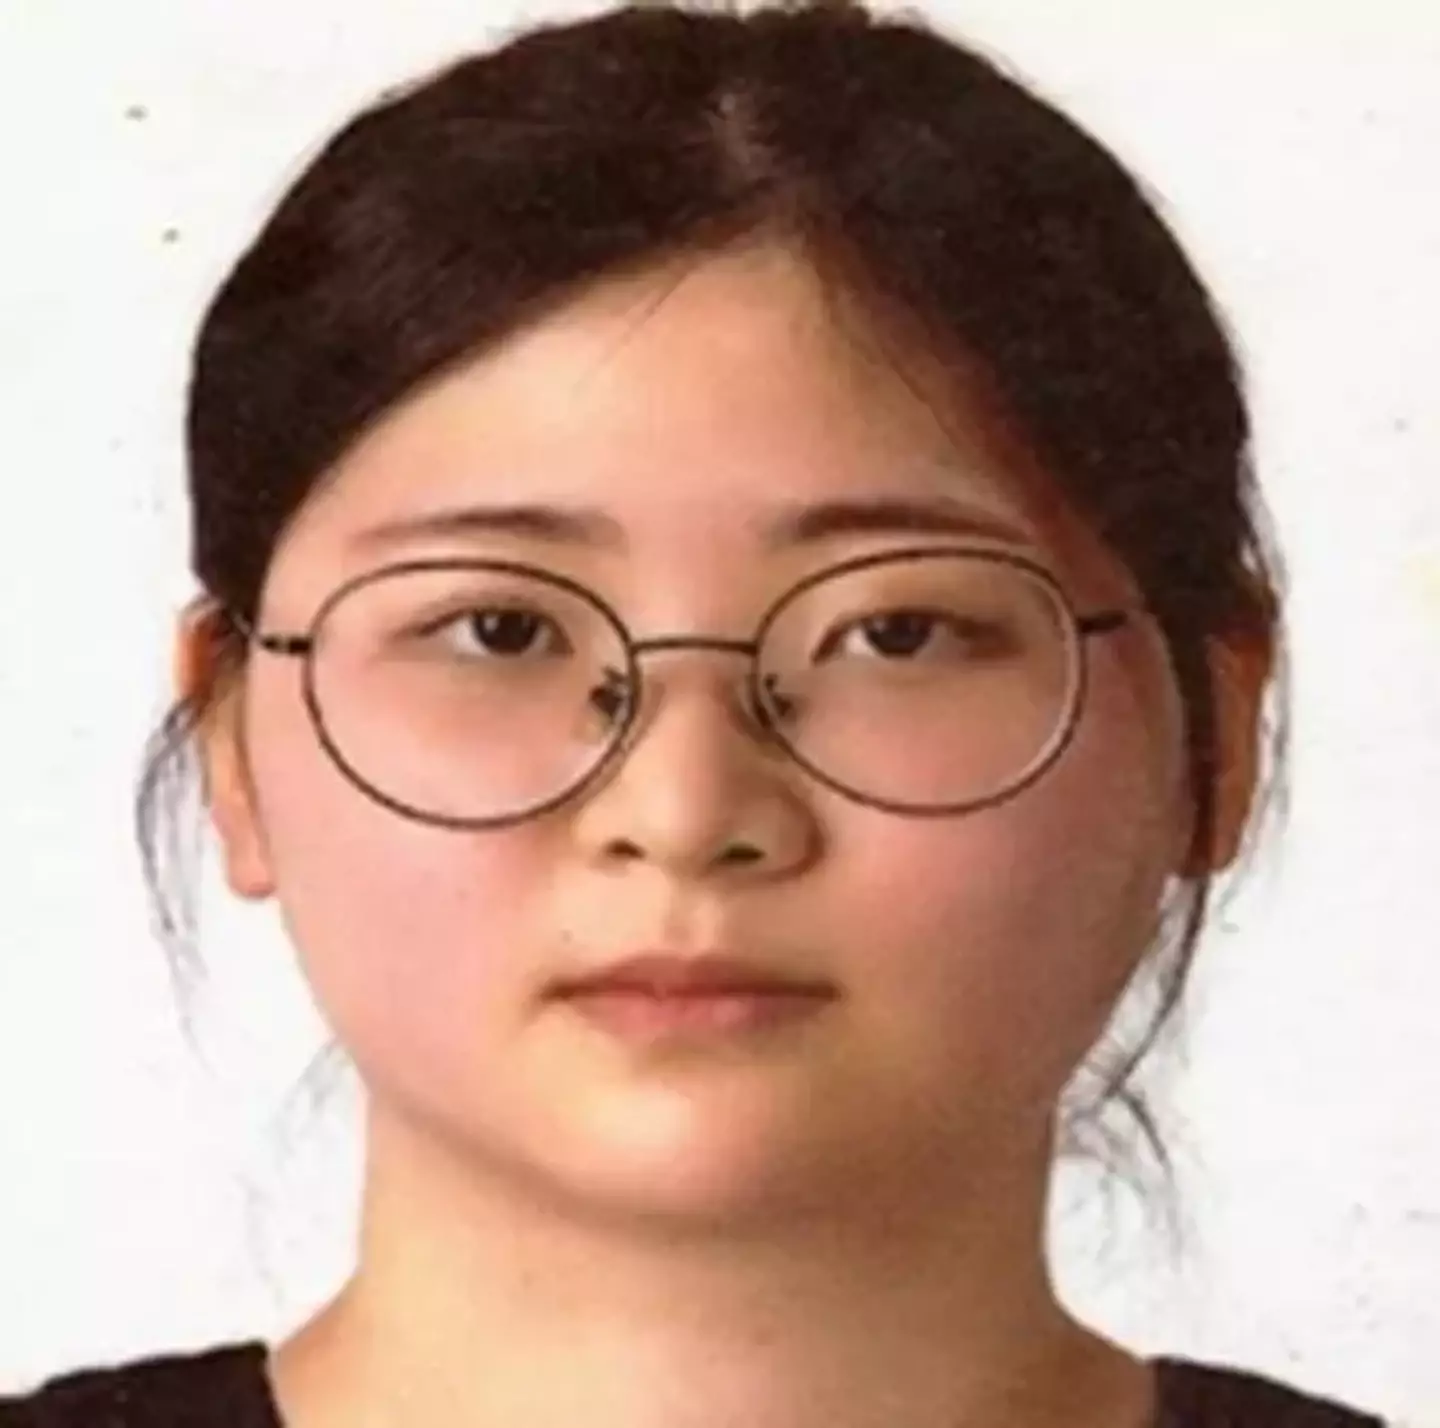 Jung Yoo-jung has been sentenced to life in prison.